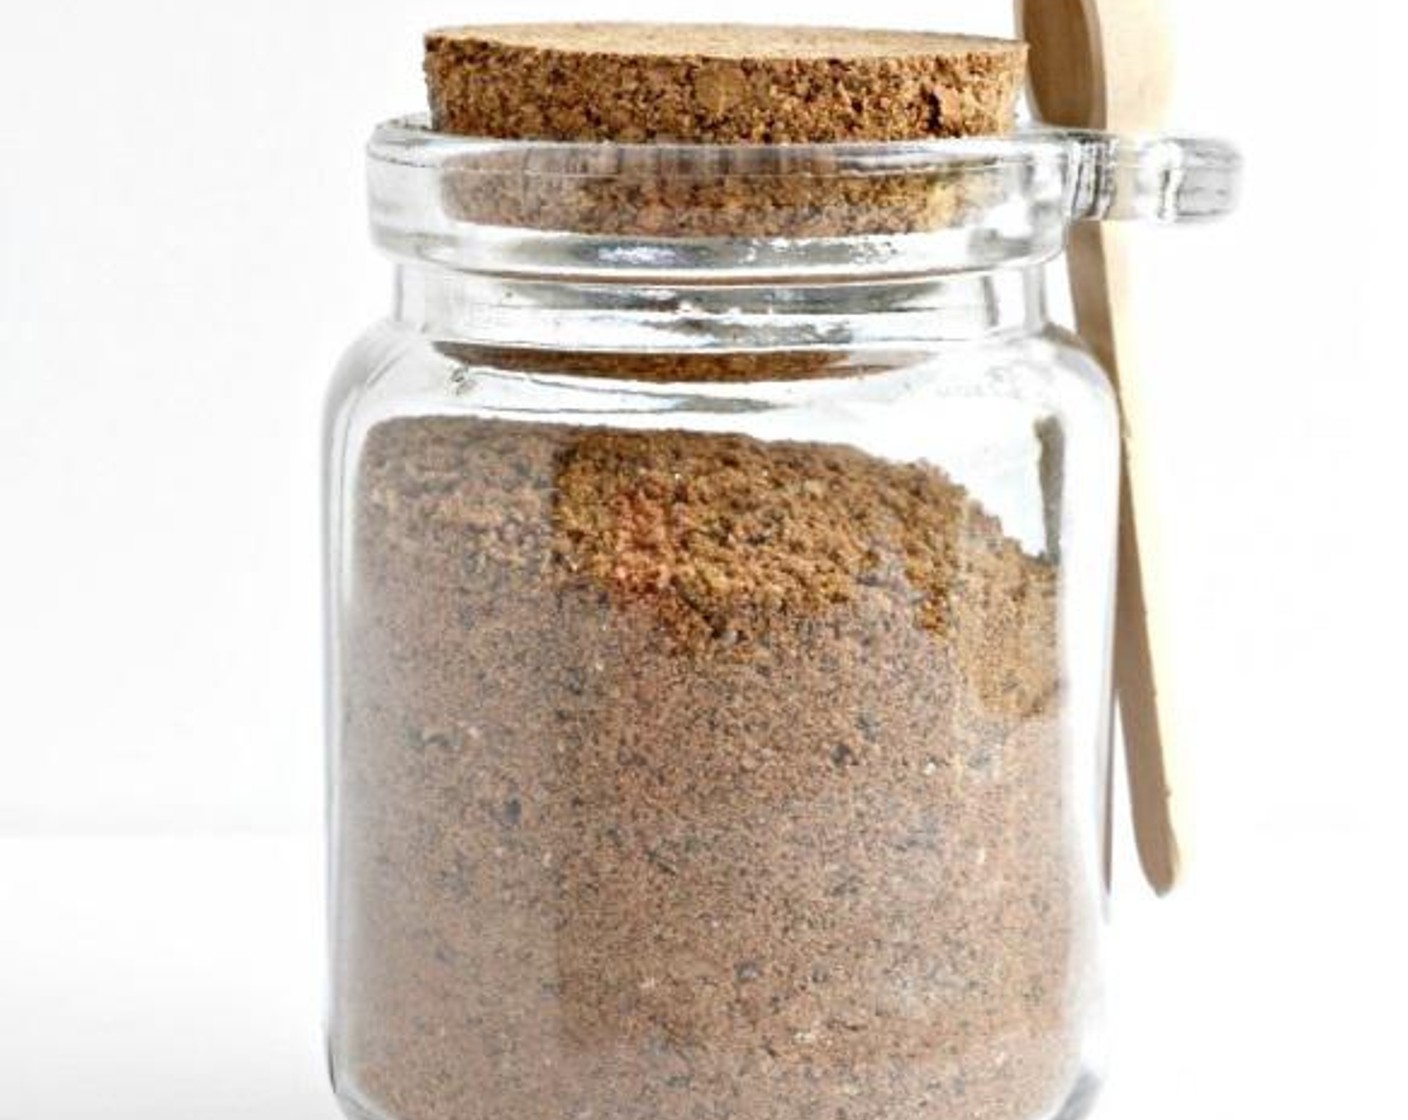 step 2 Store in a lidded jar or another airtight container in a cool, dry place. Protein powder will keep for a few weeks.